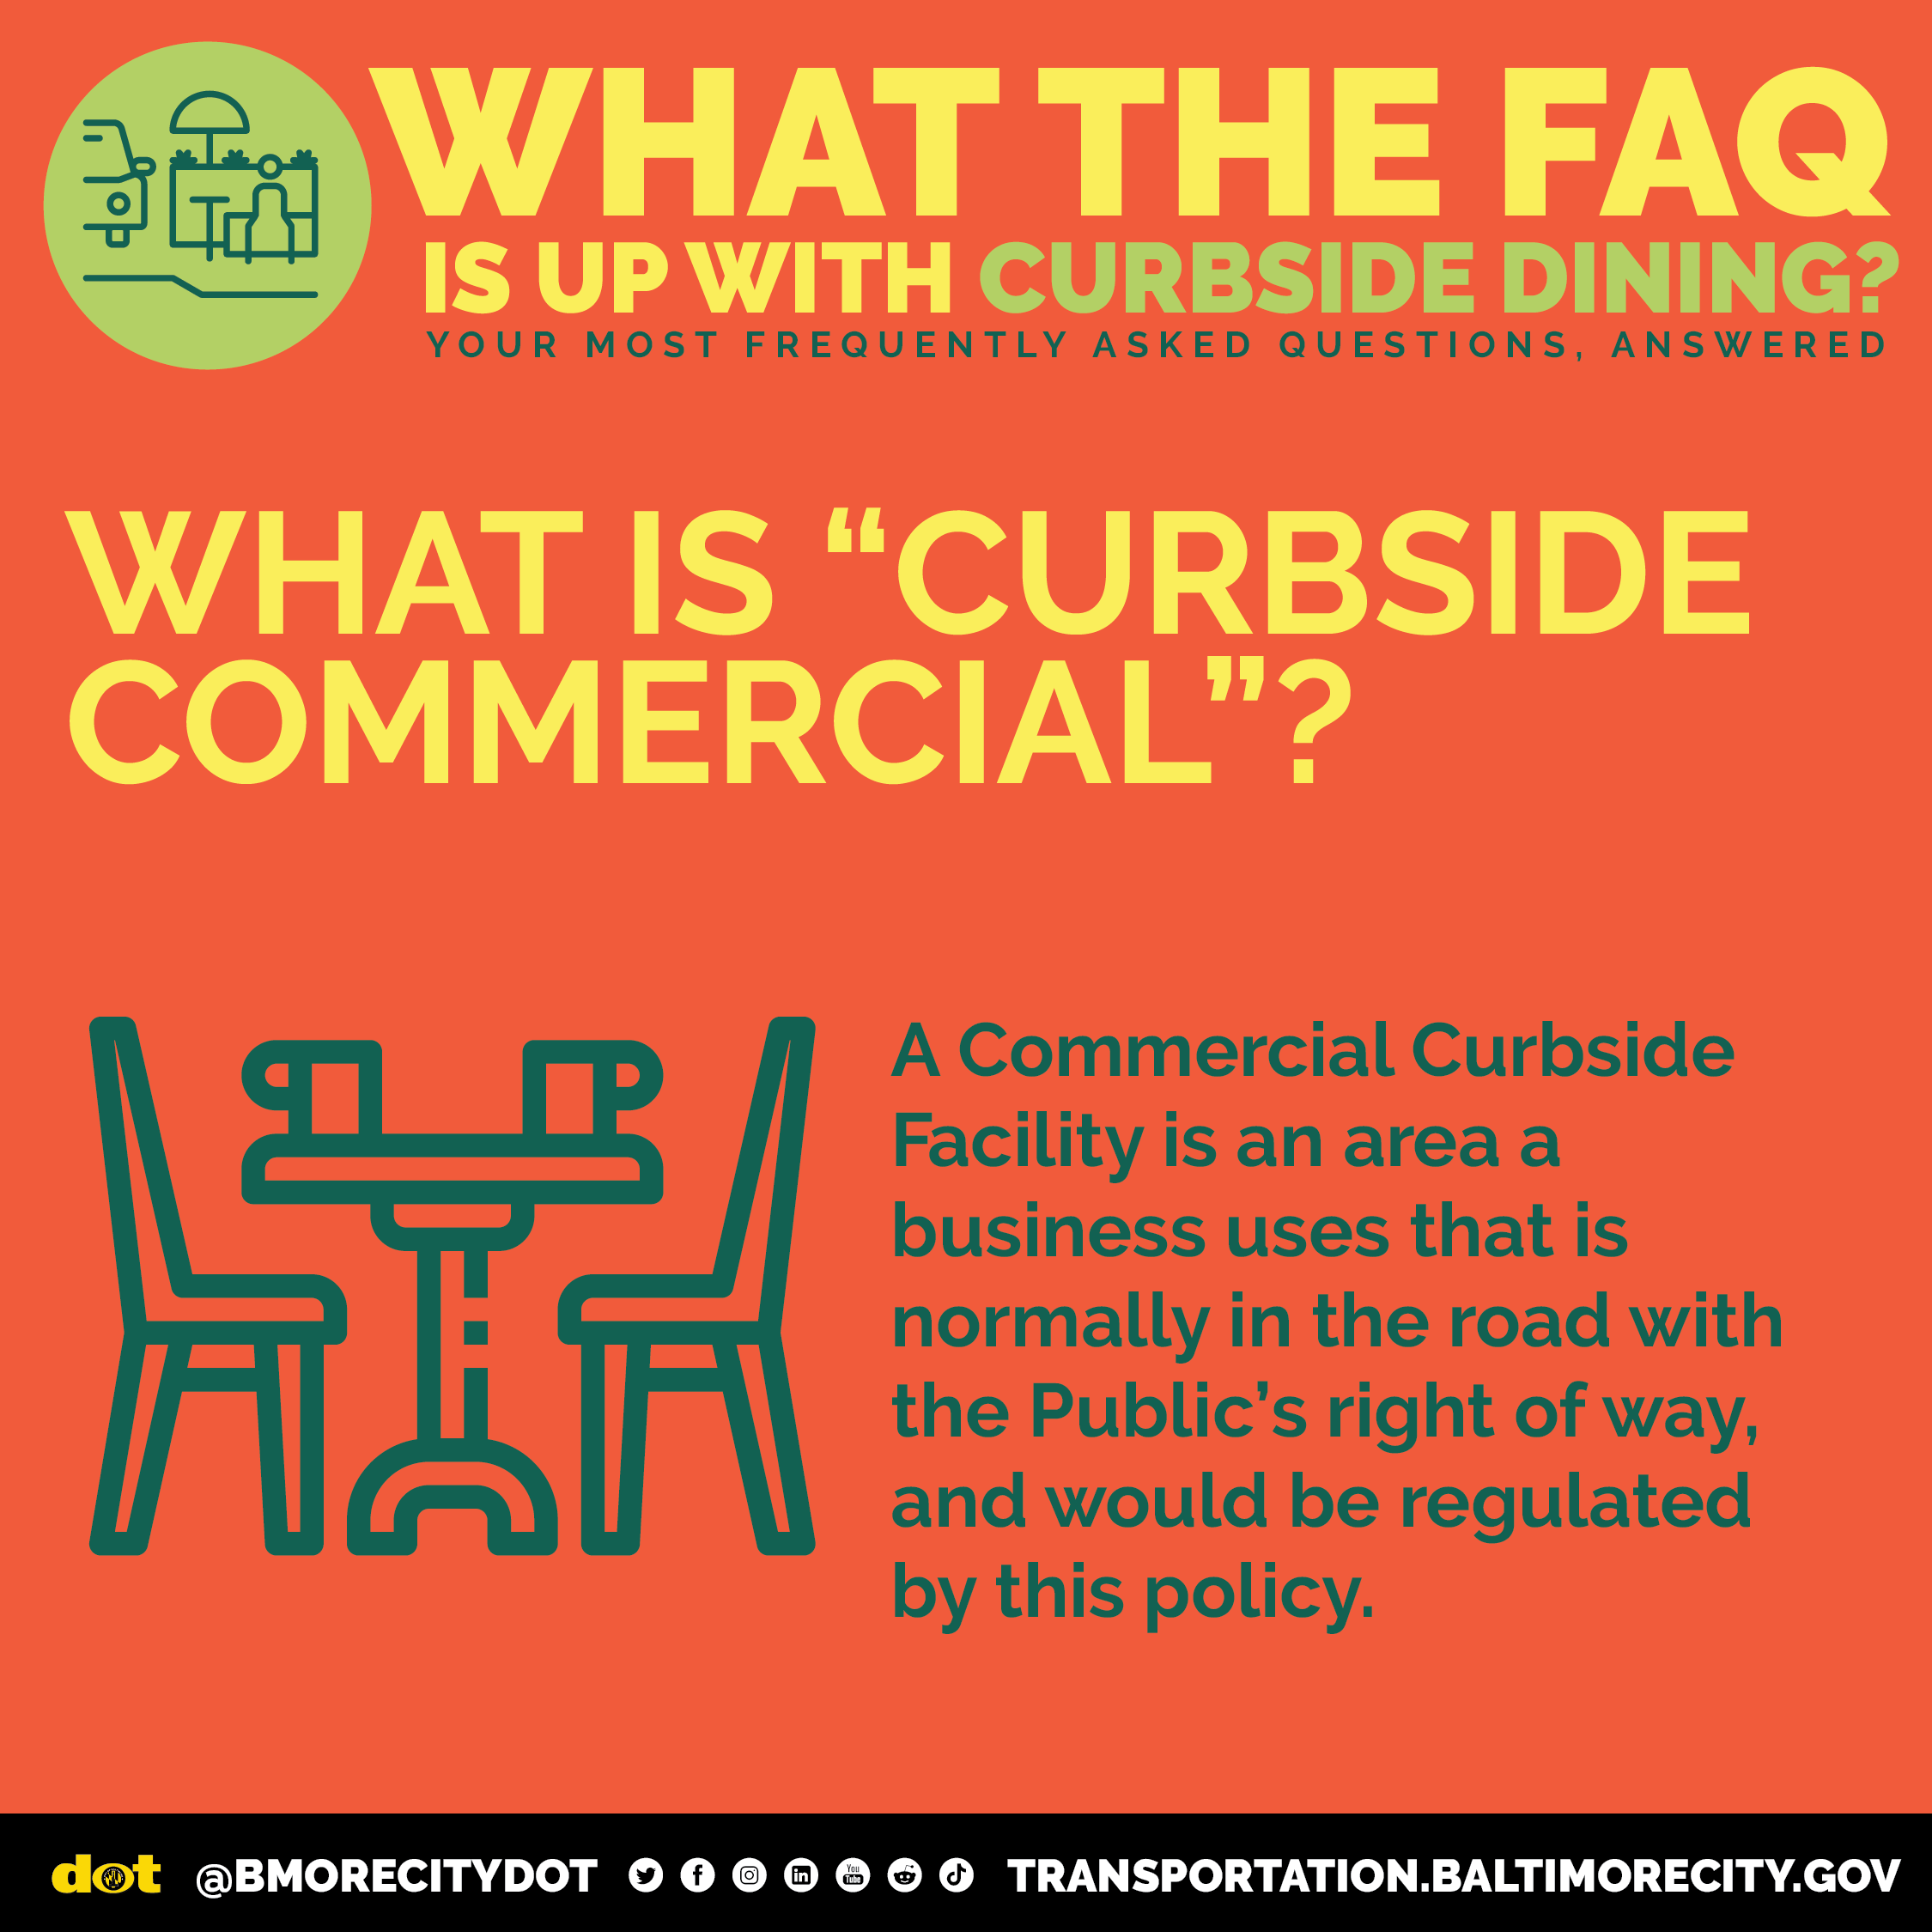 A Commercial Curbside Facility is an area a business uses that is normally in the road with the Public’s right of way, & would be regulatedby this policy.